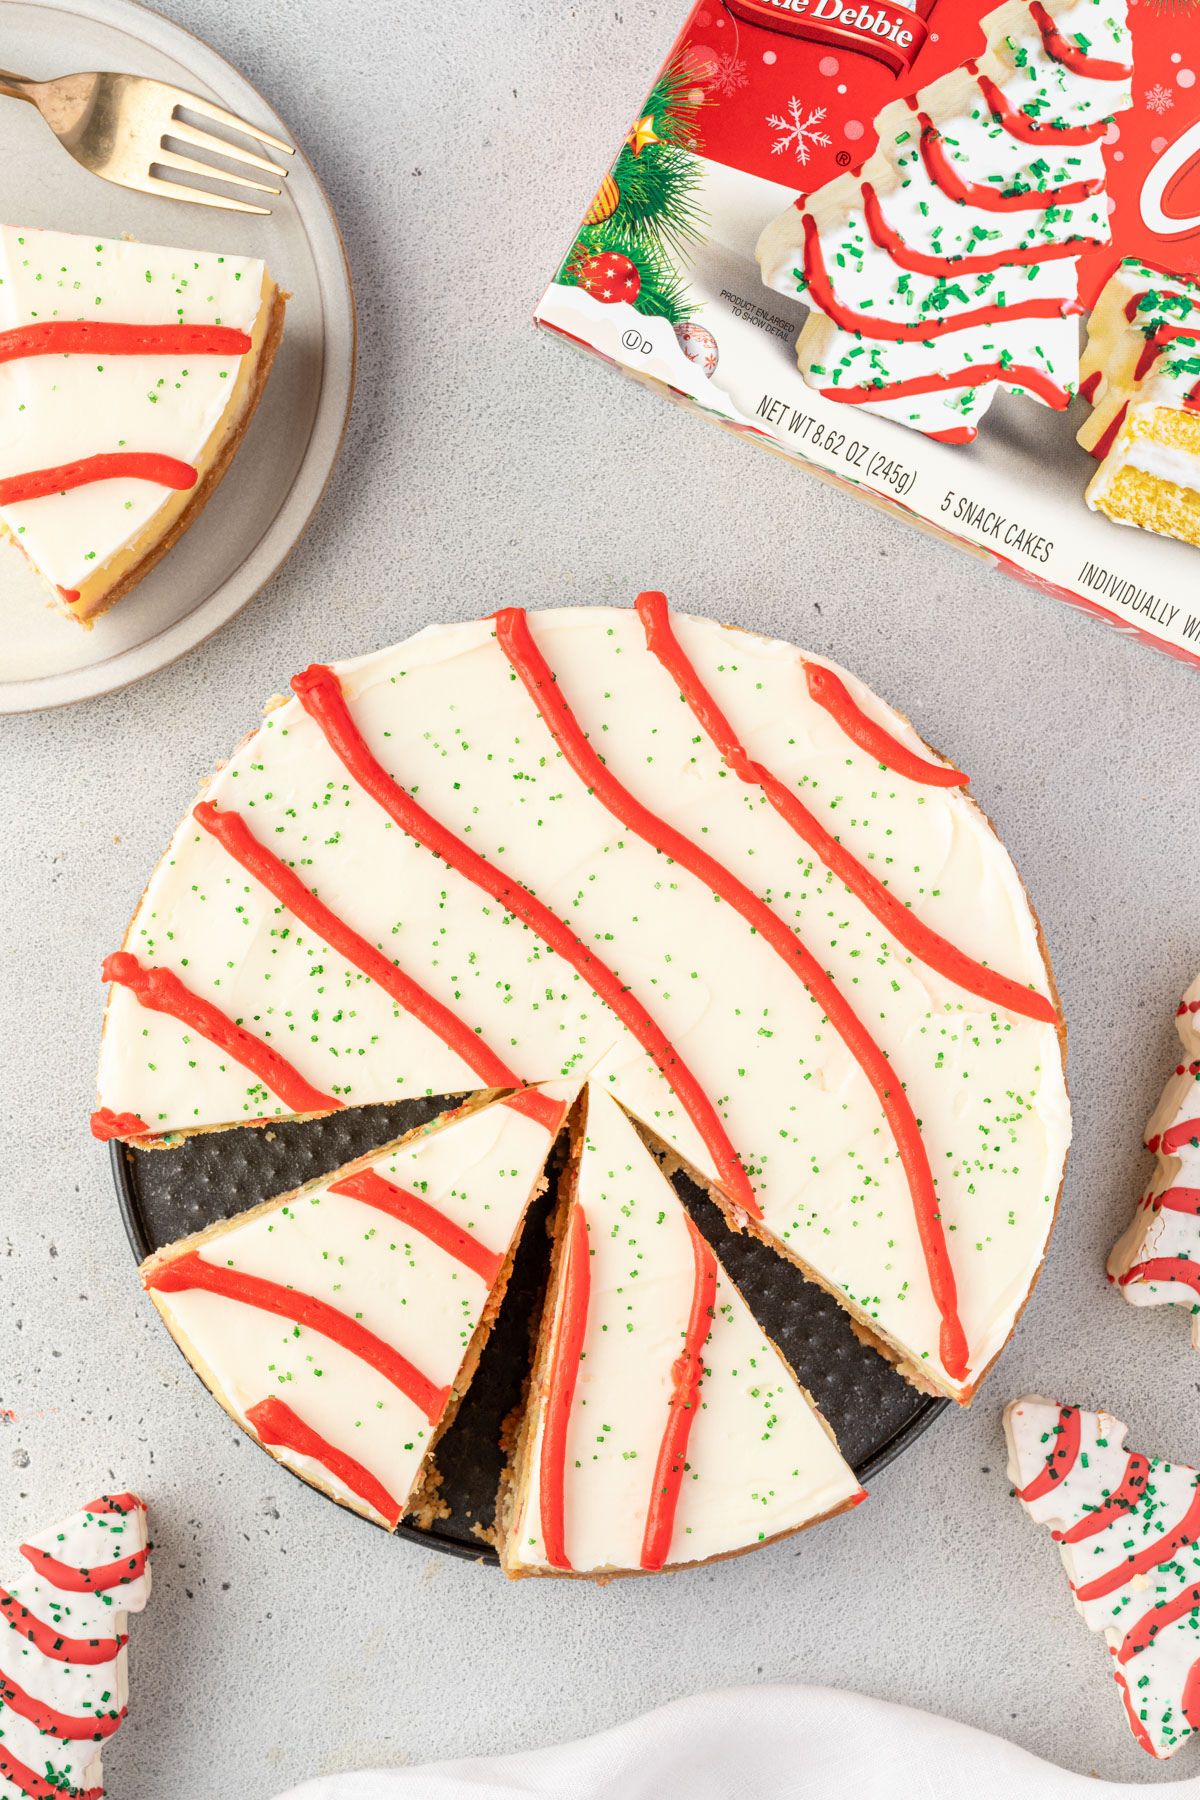 Little Debbie Christmas Tree cheesecake with slices missing, showing red wavy icing lines and green sprinkles to look like the trees.